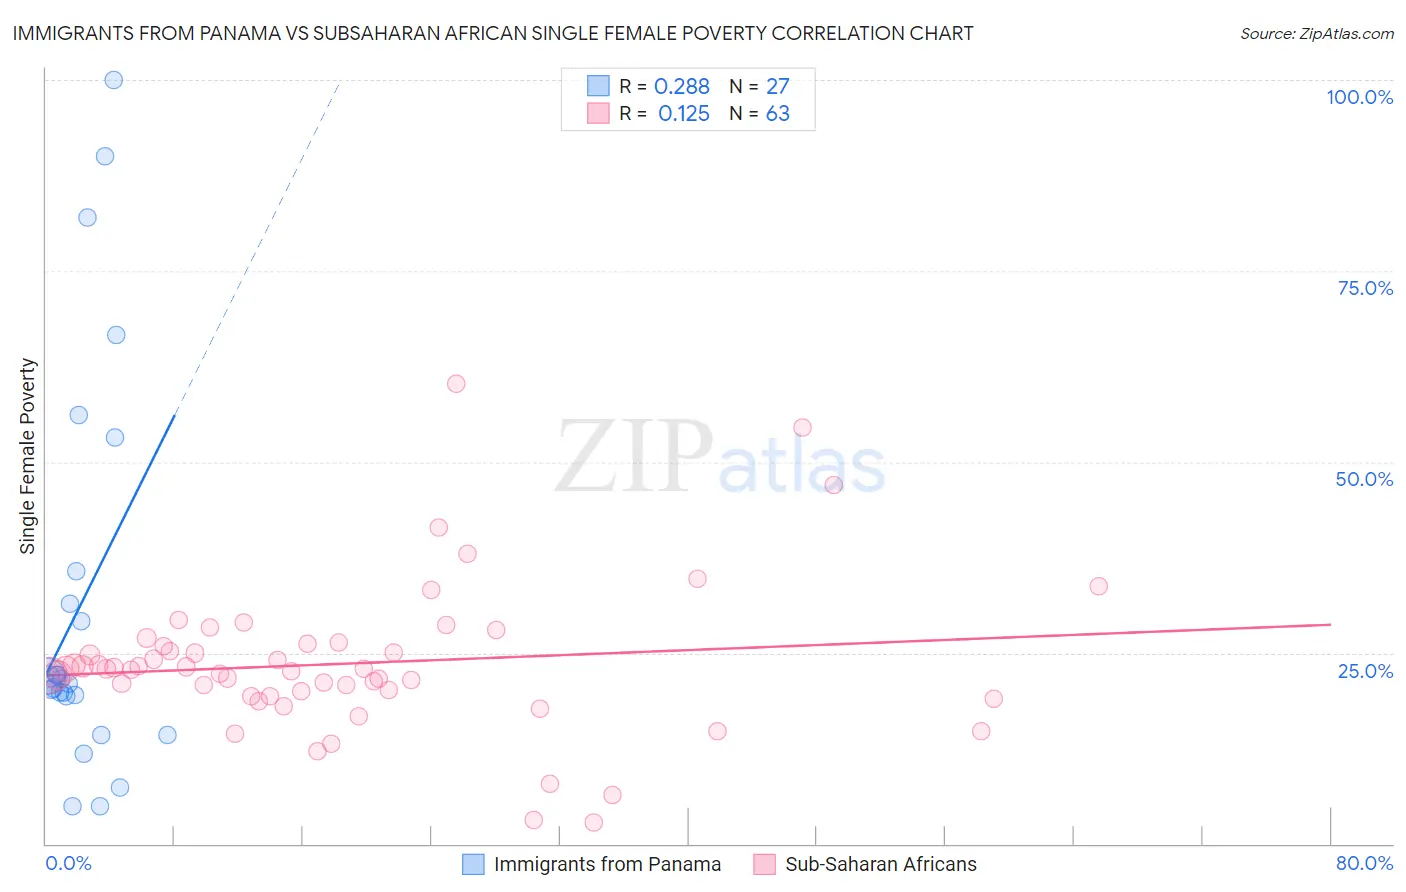 Immigrants from Panama vs Subsaharan African Single Female Poverty